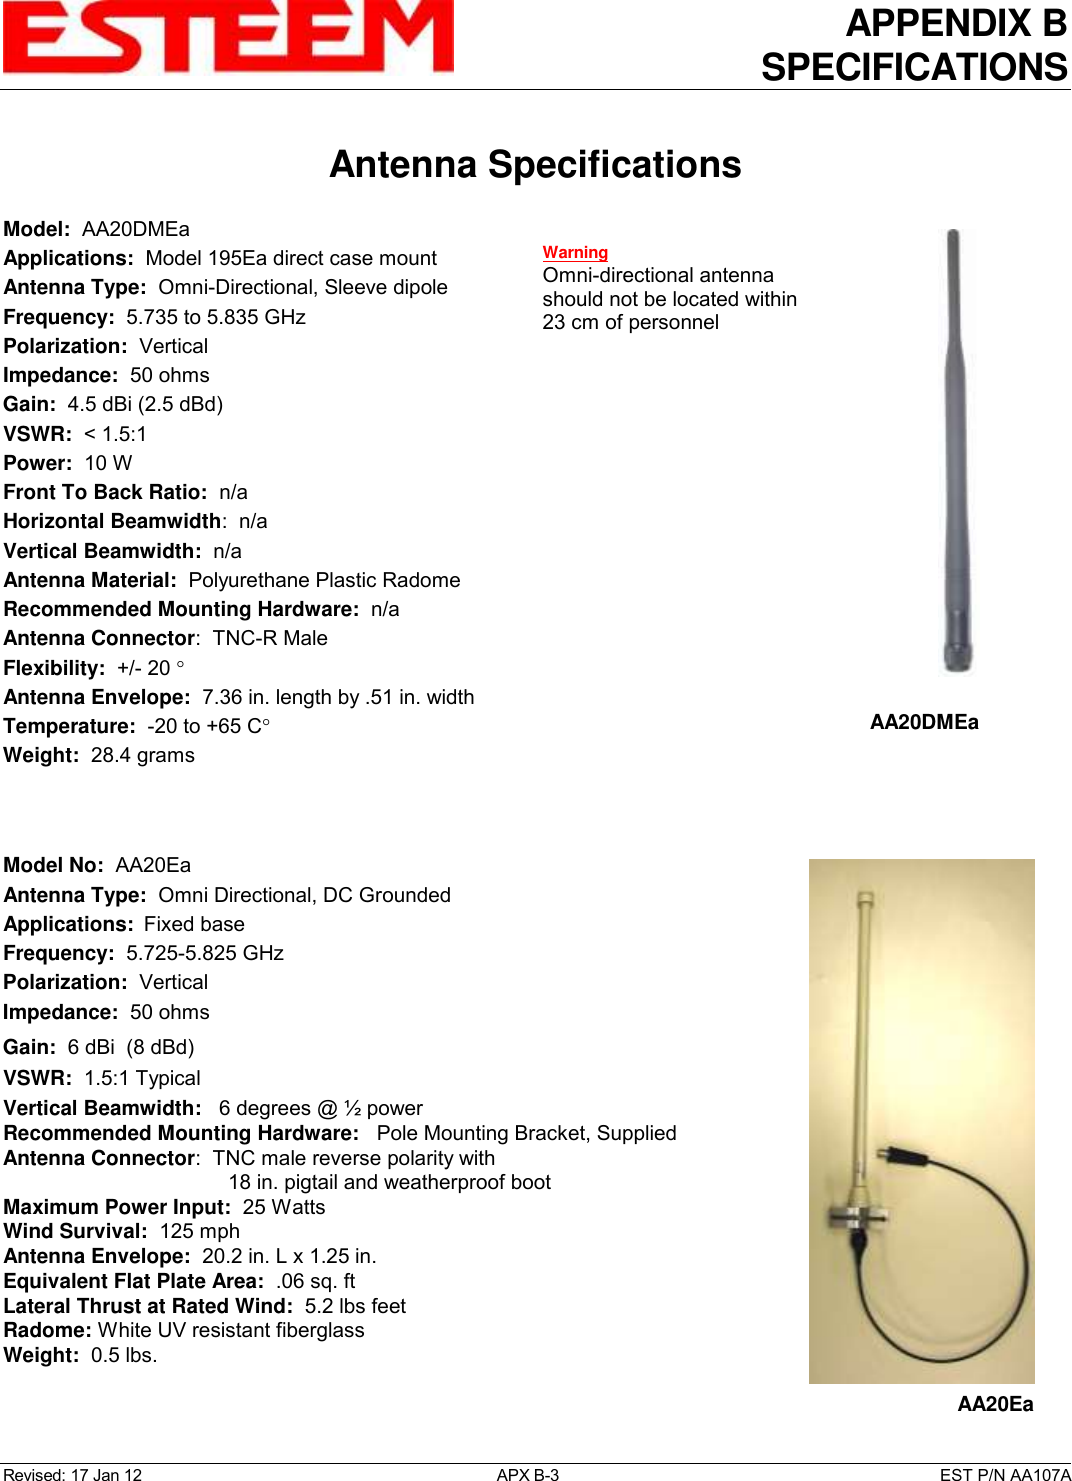 APPENDIX B SPECIFICATIONS   Antenna Specifications  Revised: 17 Jan 12  APX B-3  EST P/N AA107A Model:  AA20DMEa  Applications:  Model 195Ea direct case mount Antenna Type:  Omni-Directional, Sleeve dipole Frequency:  5.735 to 5.835 GHz Polarization:  Vertical Impedance:  50 ohms Gain:  4.5 dBi (2.5 dBd) VSWR:  &lt; 1.5:1  Power:  10 W  Front To Back Ratio:  n/a Horizontal Beamwidth:  n/a Vertical Beamwidth:  n/a Antenna Material:  Polyurethane Plastic Radome  Recommended Mounting Hardware:  n/a Antenna Connector:  TNC-R Male  Flexibility:  +/- 20   Antenna Envelope:  7.36 in. length by .51 in. width Temperature:  -20 to +65 C  Weight:  28.4 grams    Model No:  AA20Ea Antenna Type:  Omni Directional, DC Grounded Applications:  Fixed base Frequency:  5.725-5.825 GHz  Polarization:  Vertical Impedance:  50 ohms Gain:  6 dBi  (8 dBd) VSWR:  1.5:1 Typical  Vertical Beamwidth:   6 degrees @ ½ power Recommended Mounting Hardware:   Pole Mounting Bracket, Supplied Antenna Connector:  TNC male reverse polarity with  18 in. pigtail and weatherproof boot Maximum Power Input:  25 Watts Wind Survival:  125 mph Antenna Envelope:  20.2 in. L x 1.25 in. Equivalent Flat Plate Area:  .06 sq. ft Lateral Thrust at Rated Wind:  5.2 lbs feet Radome: White UV resistant fiberglass Weight:  0.5 lbs.    AA20DMEa  AA20Ea Warning Omni-directional antenna should not be located within 23 cm of personnel 